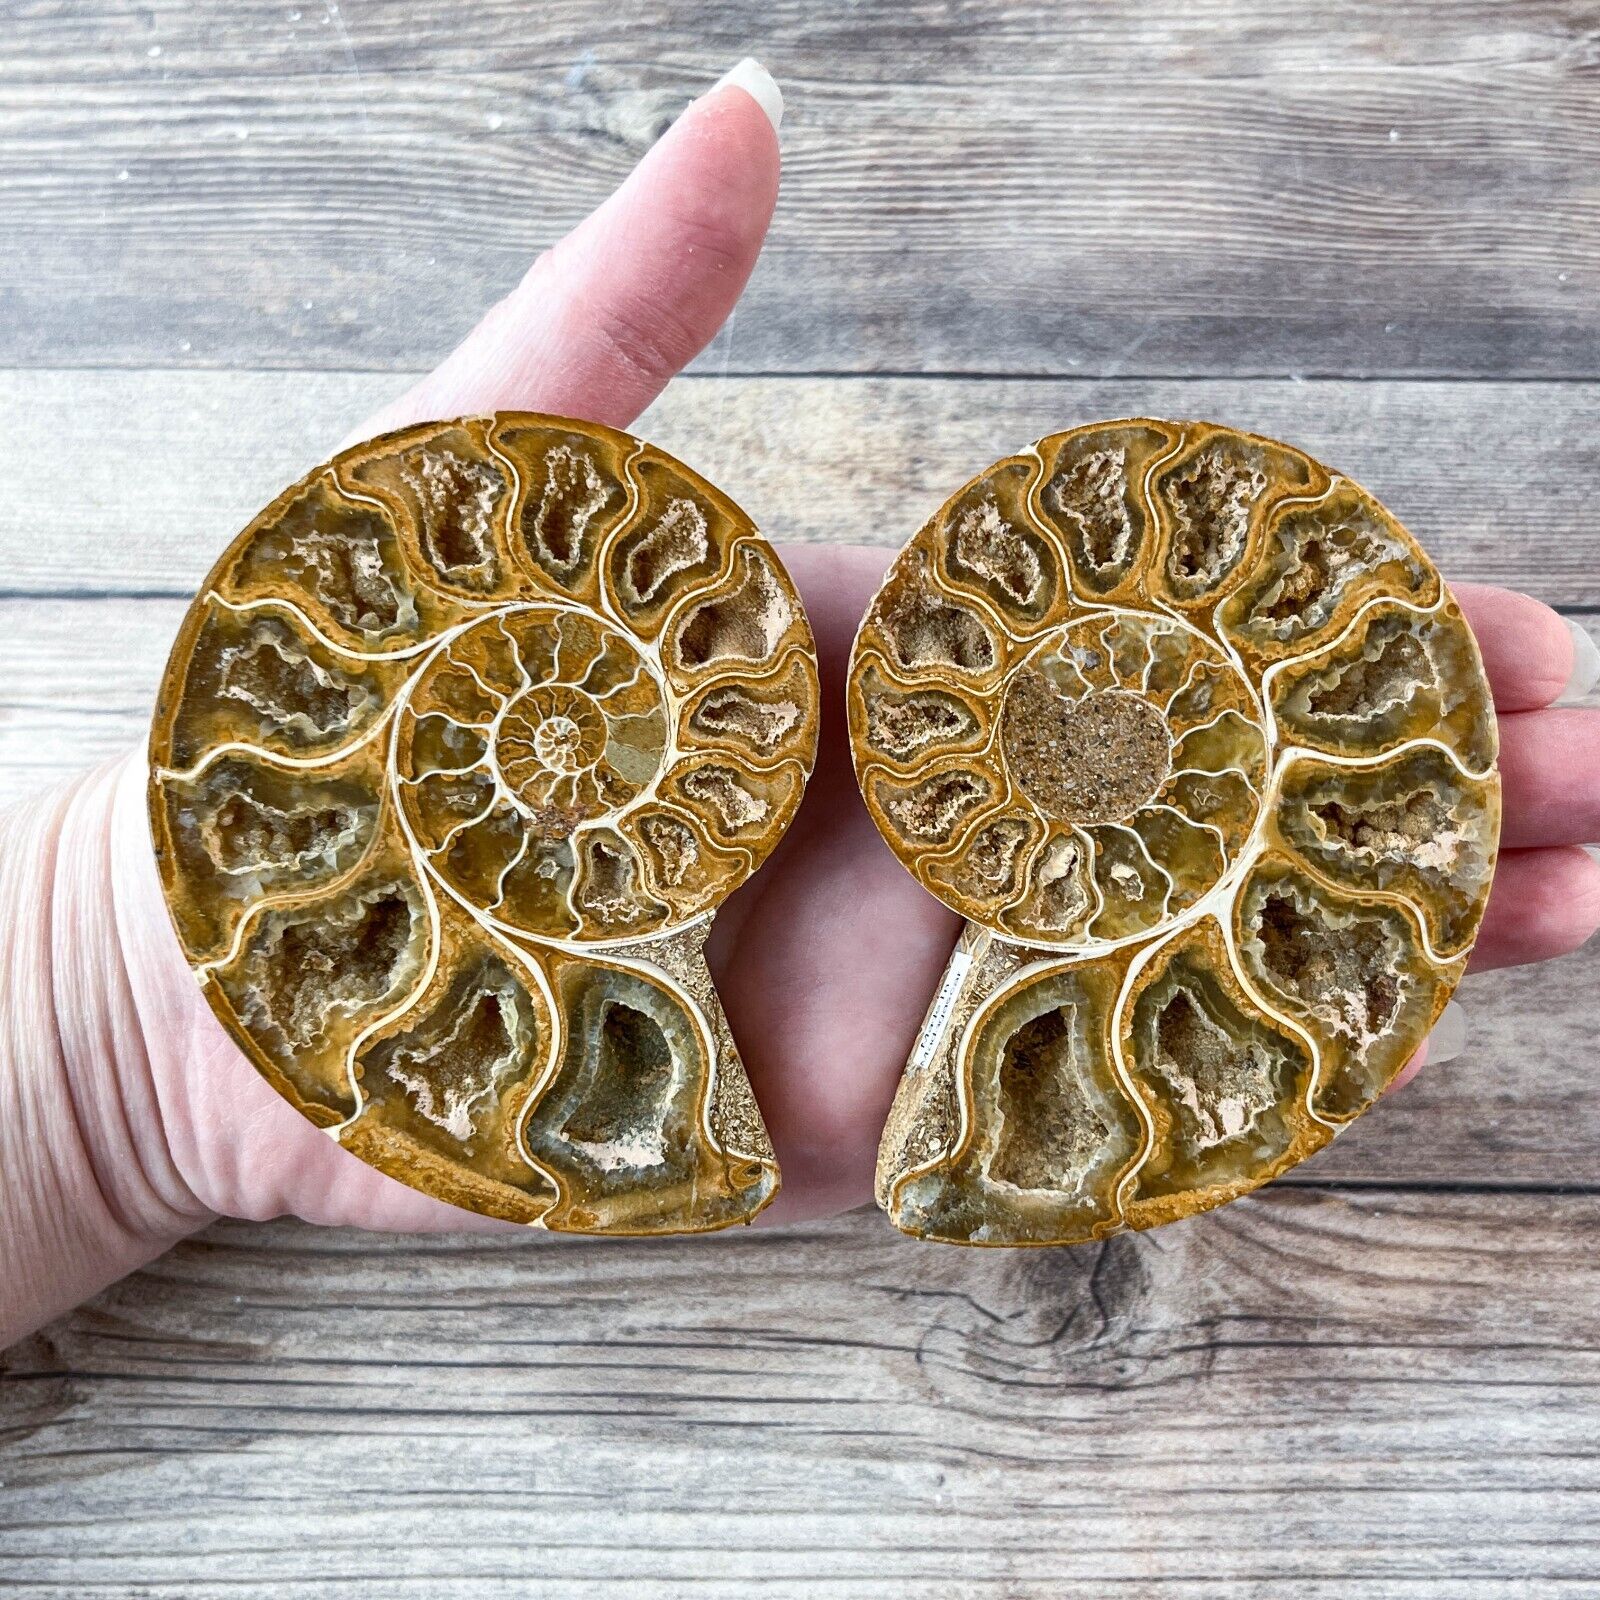 Ammonite Fossil Pair with Calcite Chambers 154g, Polished